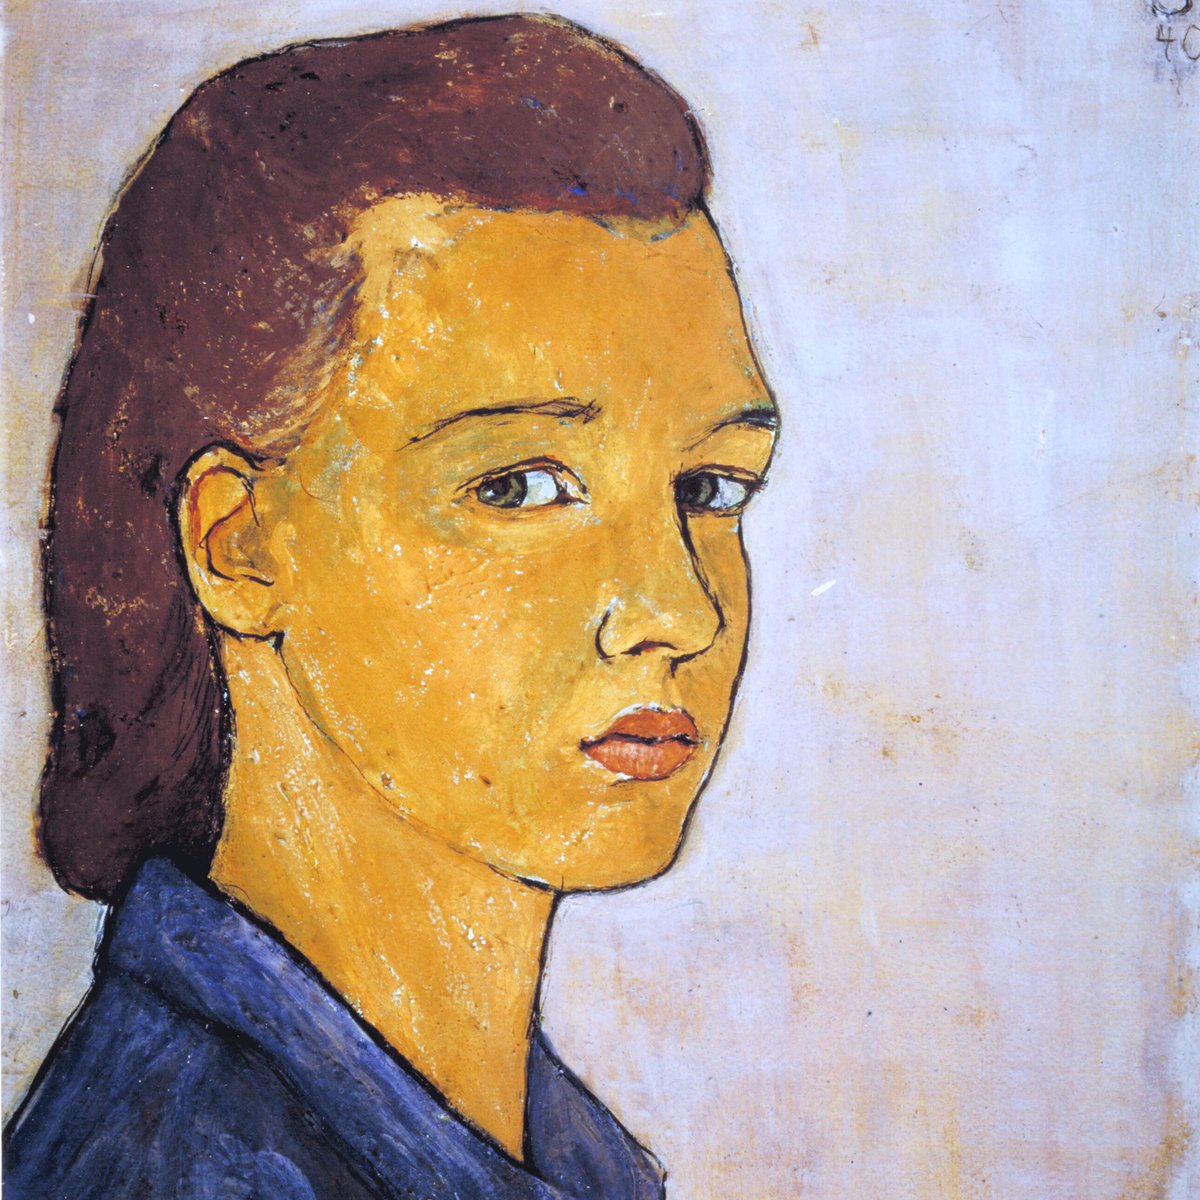 Charlotte Salomon (1917-43) was a German Jewish artist who created a ‘diary’ of autobiographical paintings. Her work is profoundly moving. She was captured in 1943 in France & sent to Auschwitz. She & her unborn child were murdered there.